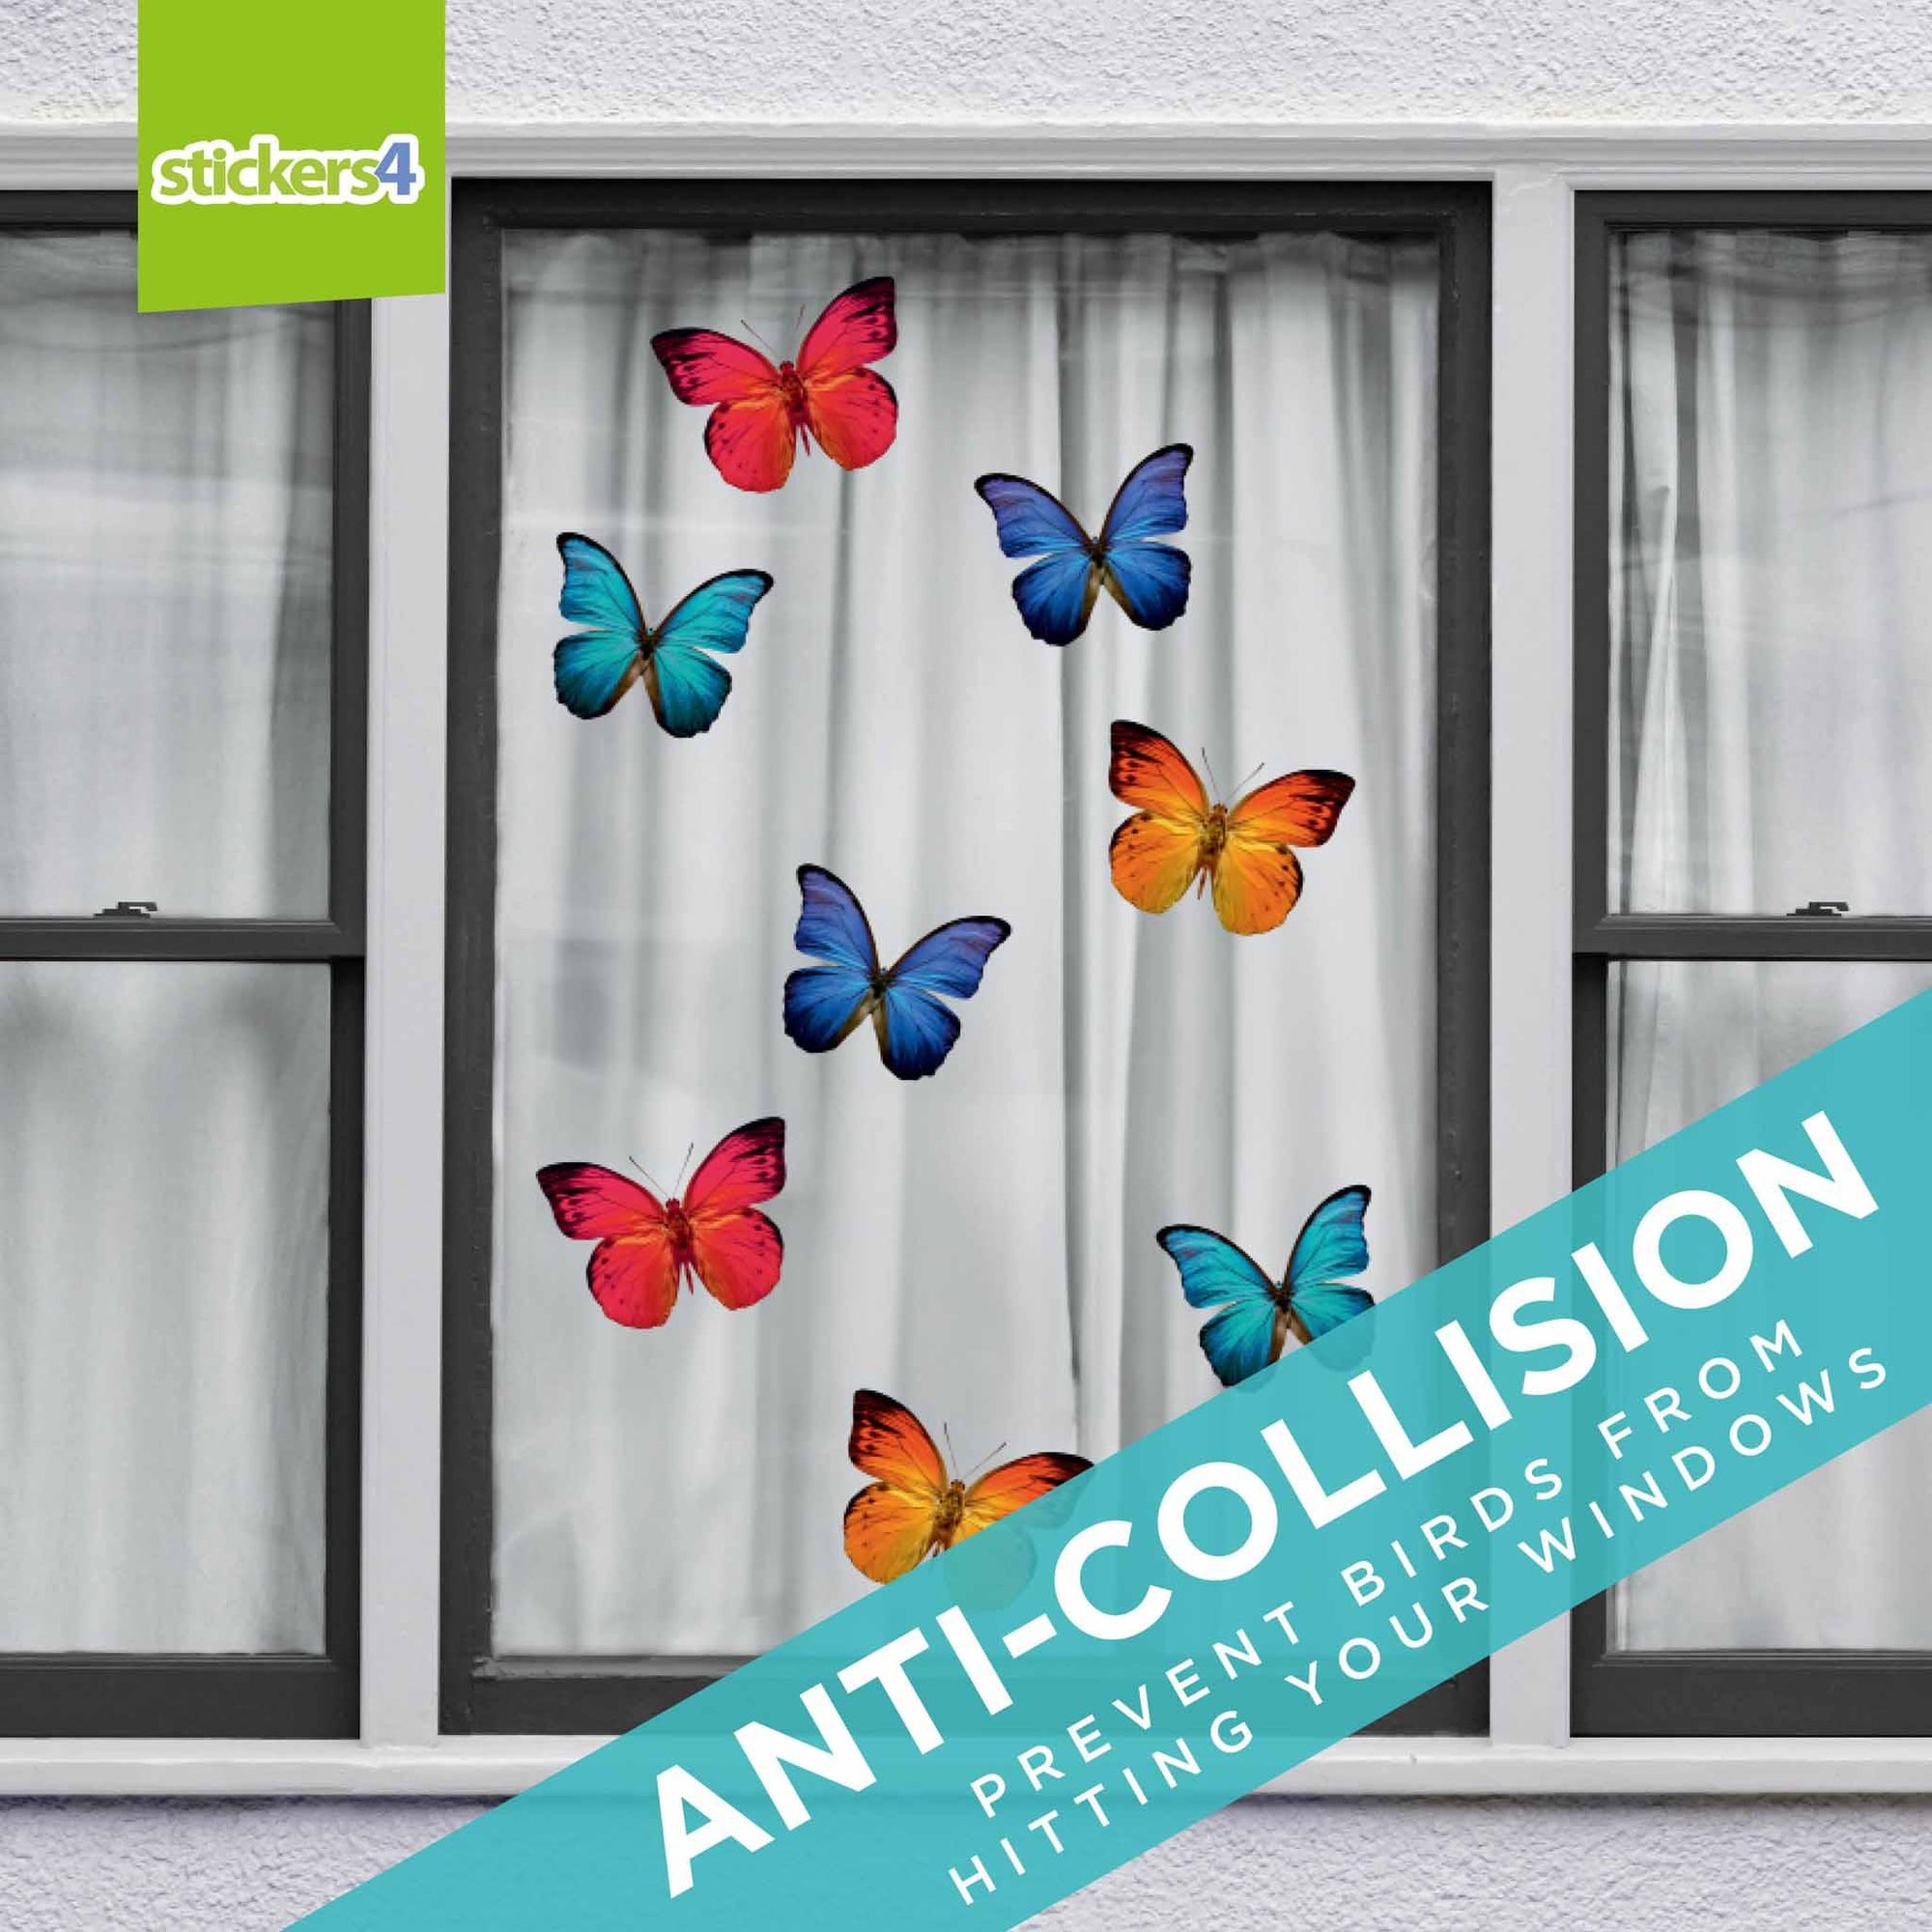 8 Large Colourful Butterfly Static Cling Window Stickers Decorative Bird Strike Prevention